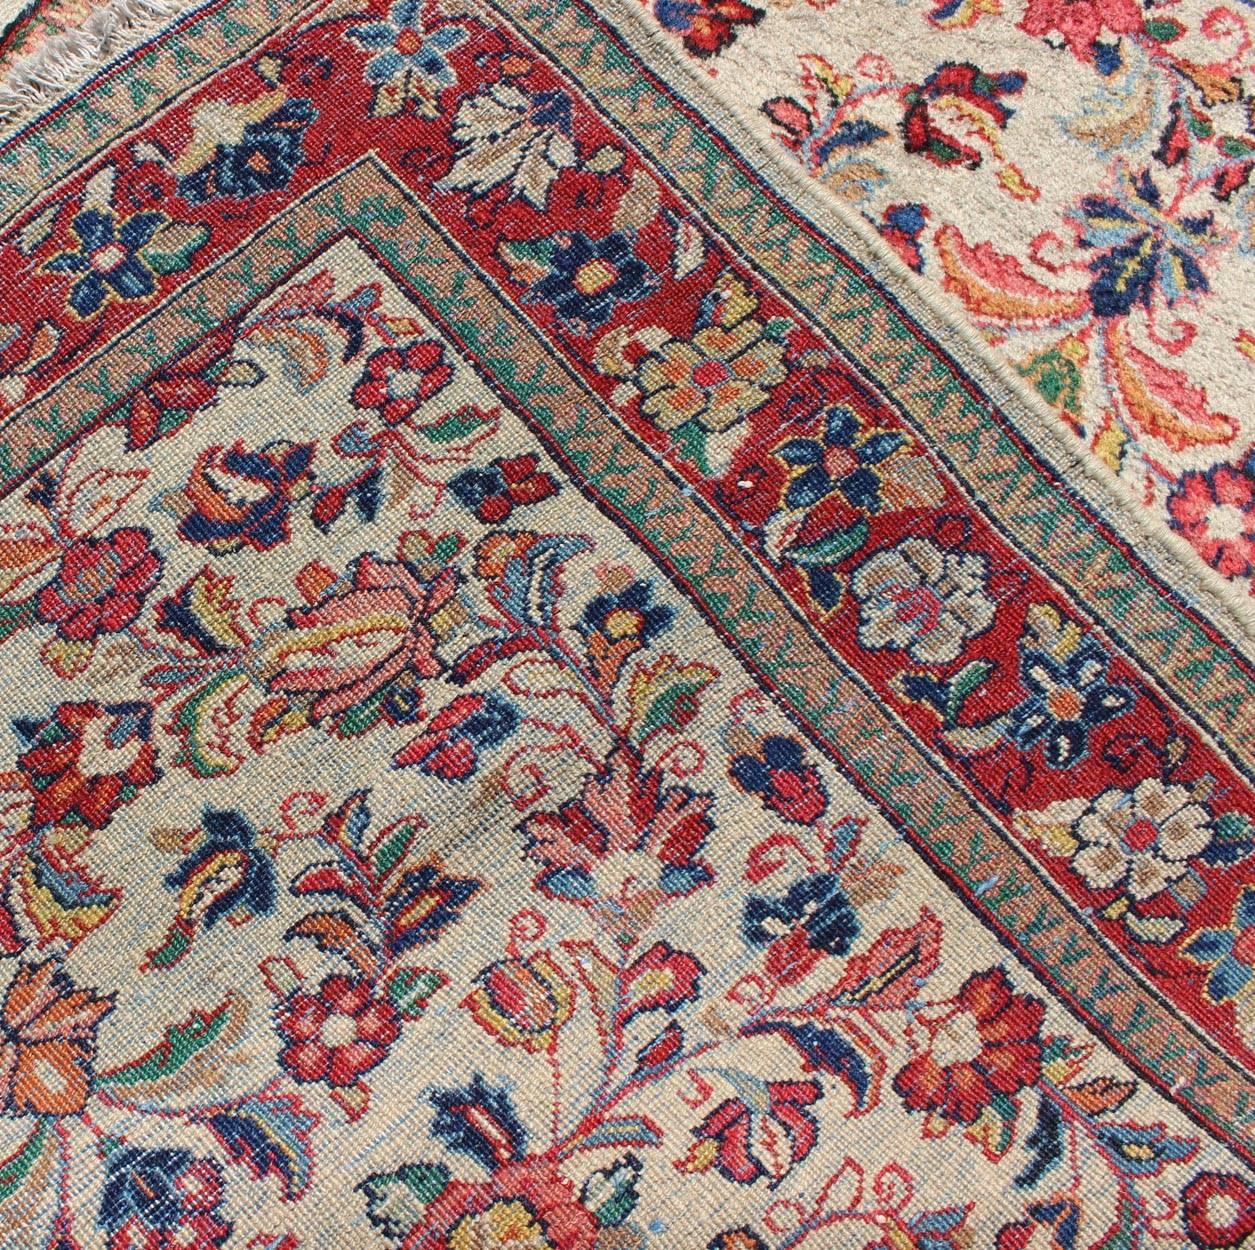 Early 20th Century Antique Persian Sarouk Rug with All-Over Floral Design in Rich Red and Ivory For Sale